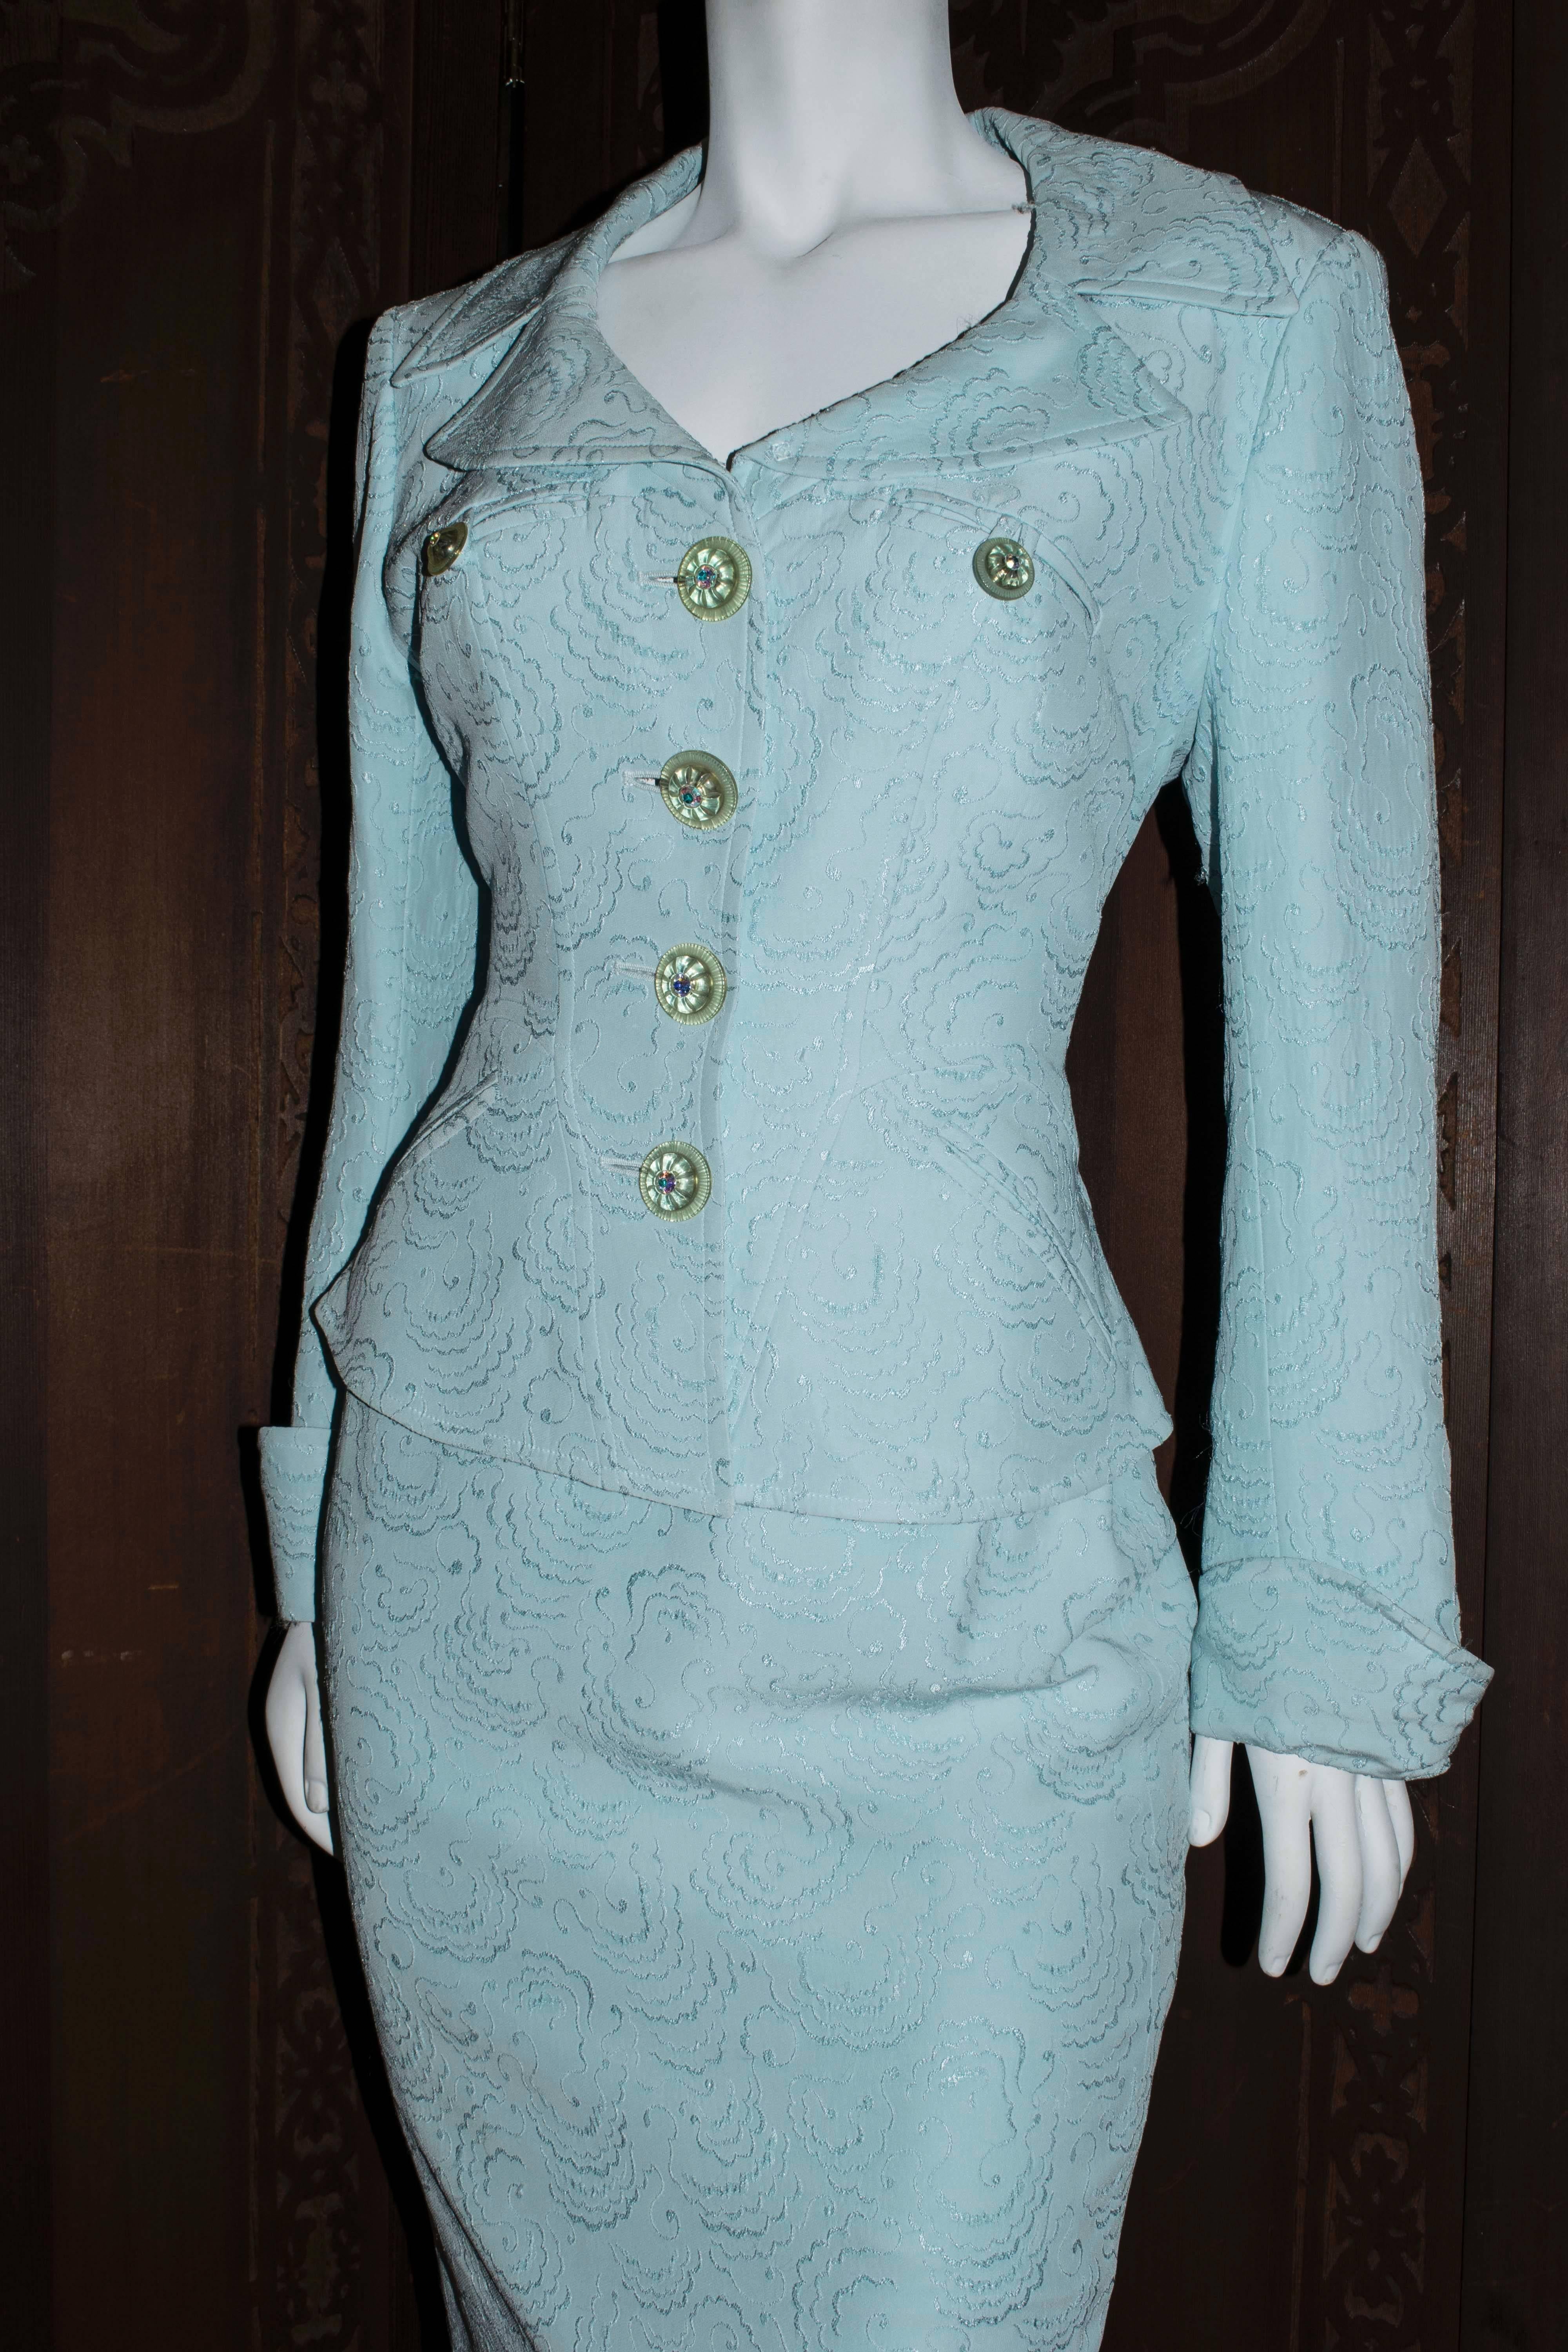 1990s Christian Lacroix Powder Blue Two Piece Skirt Suit.

Stunning tailored suit Designed by Christian Lacroix with cloud detail embroidery and decorative glass and rhinestone buttons. 

Size 40

B 40
W 38
H 36
L 46